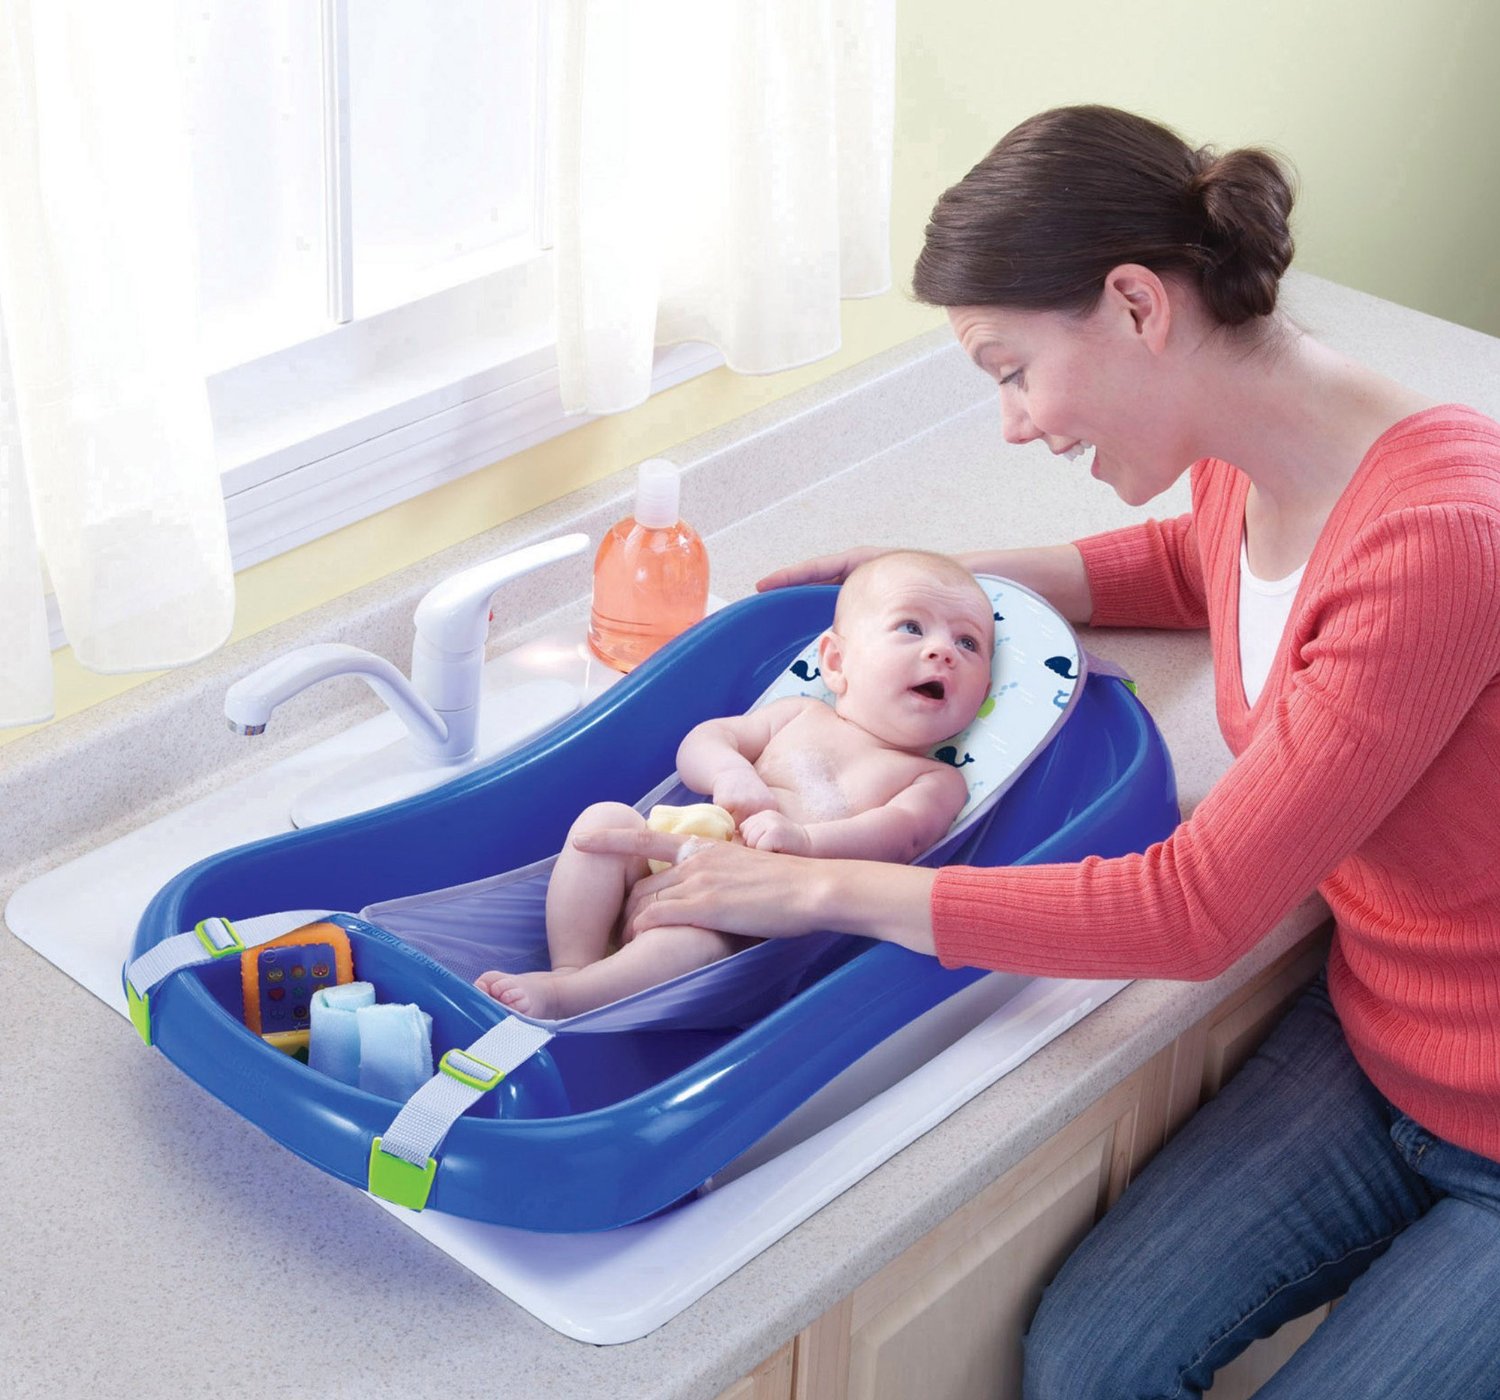 The best baby shower gift she got was this EXACT baby bathtub.  It is awesome!